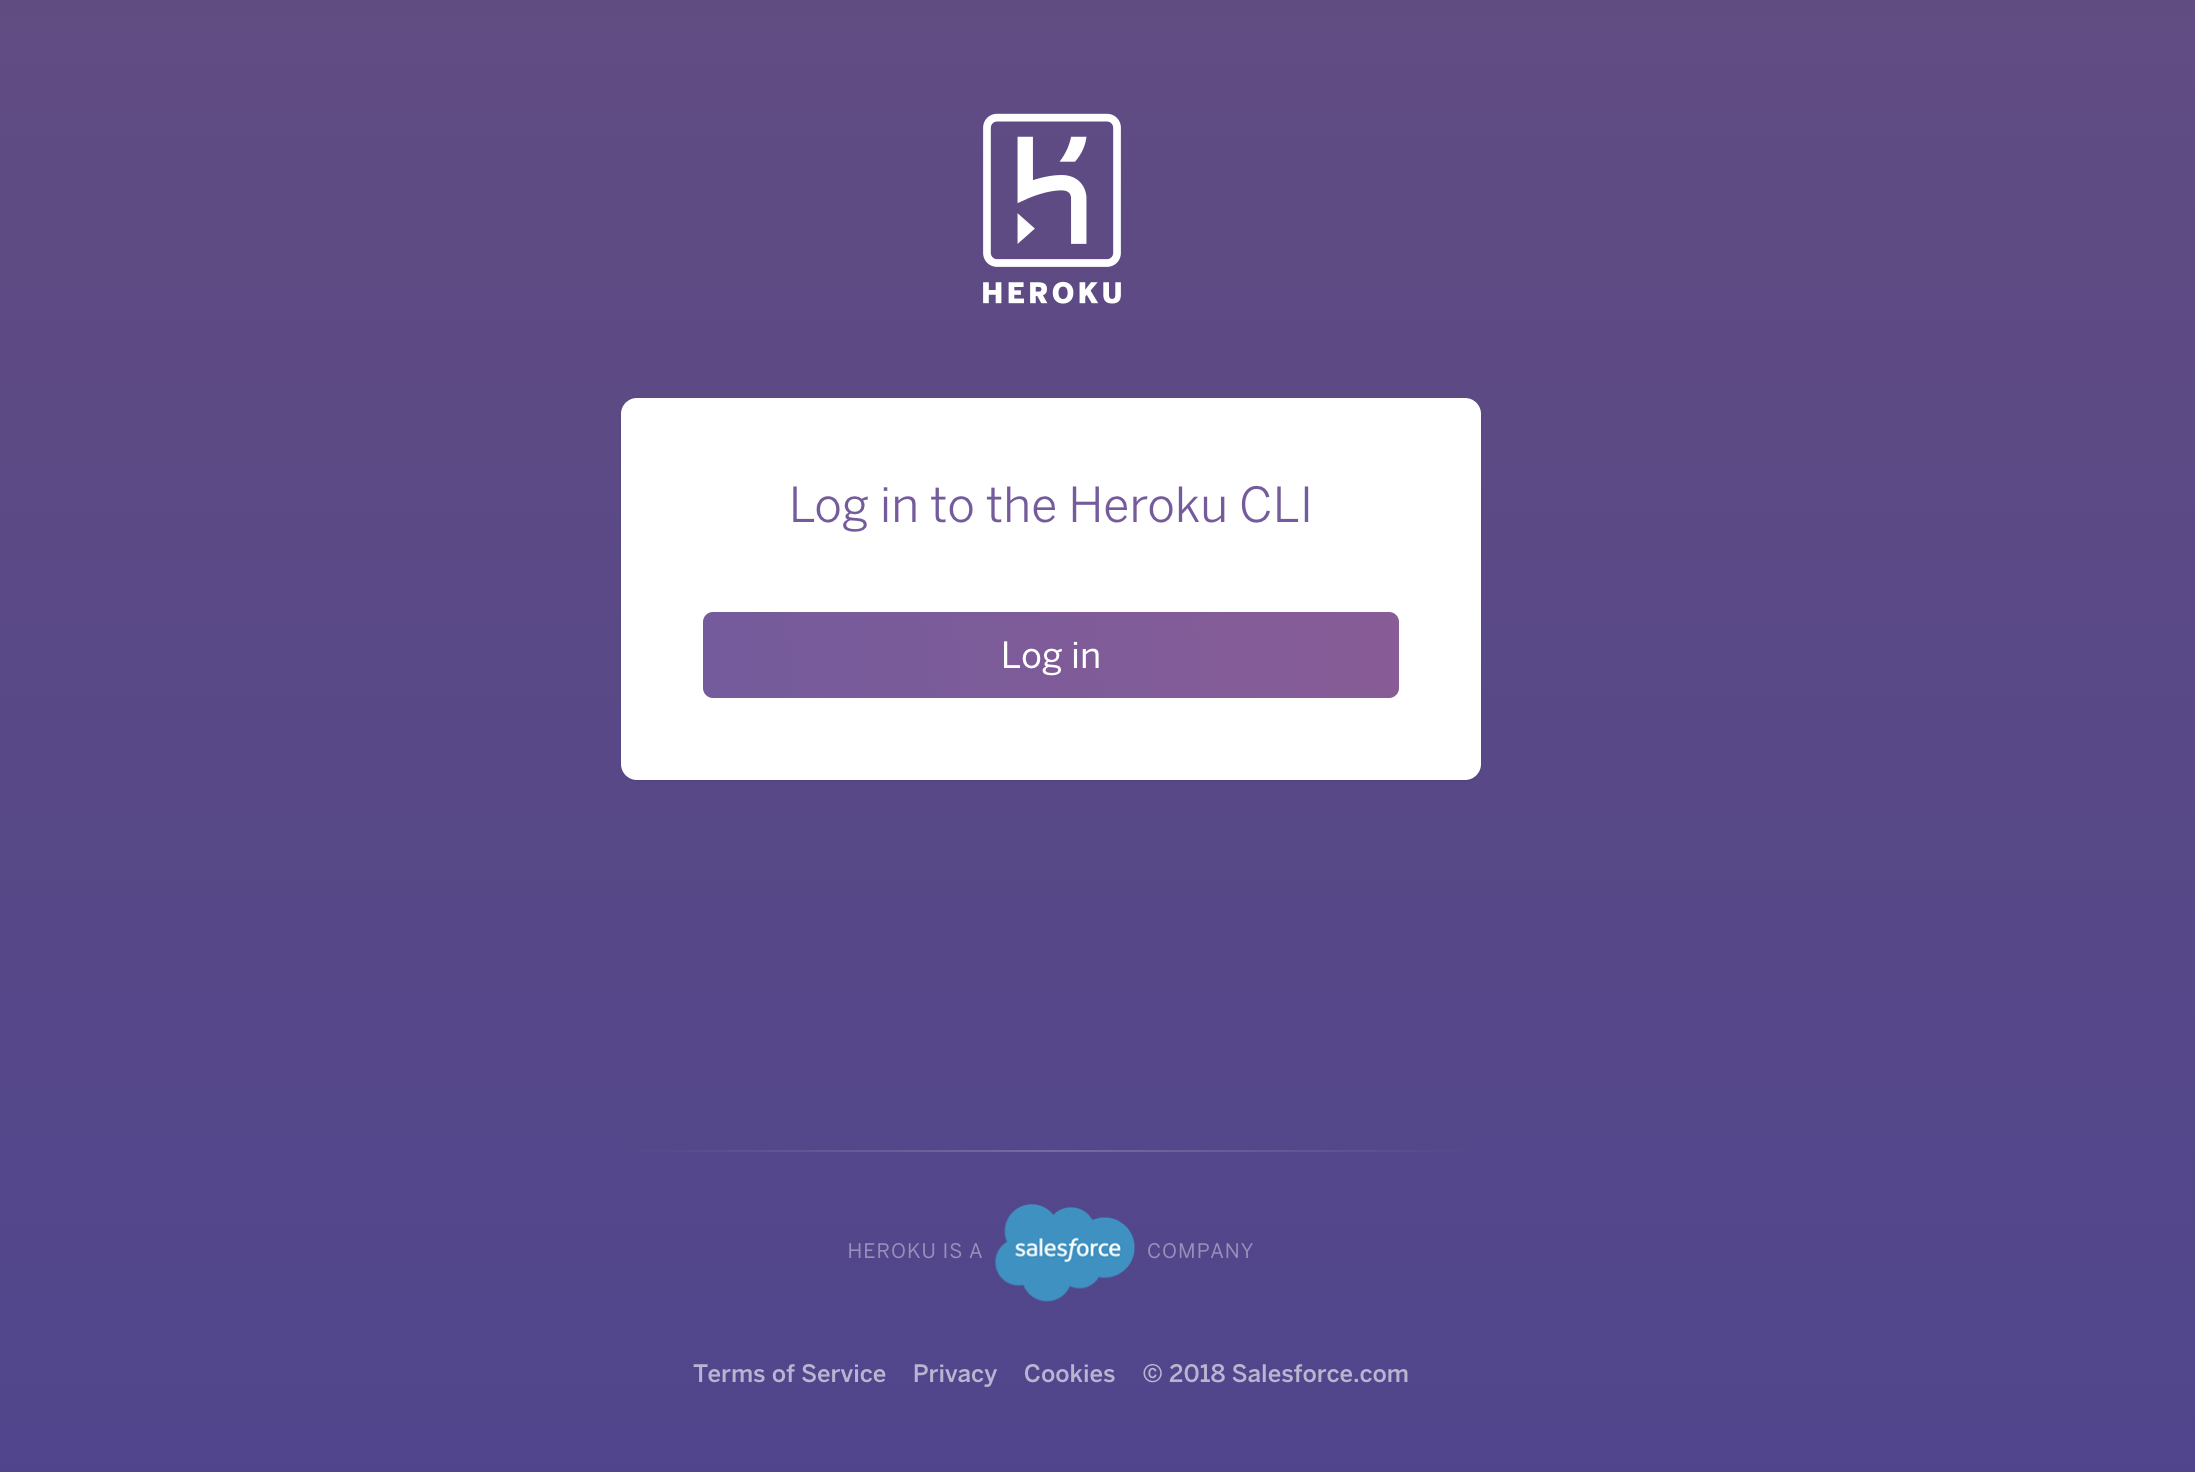 Running the heroku login command launches a web browser and opens the Heroku account login page, where you can select SSO login.